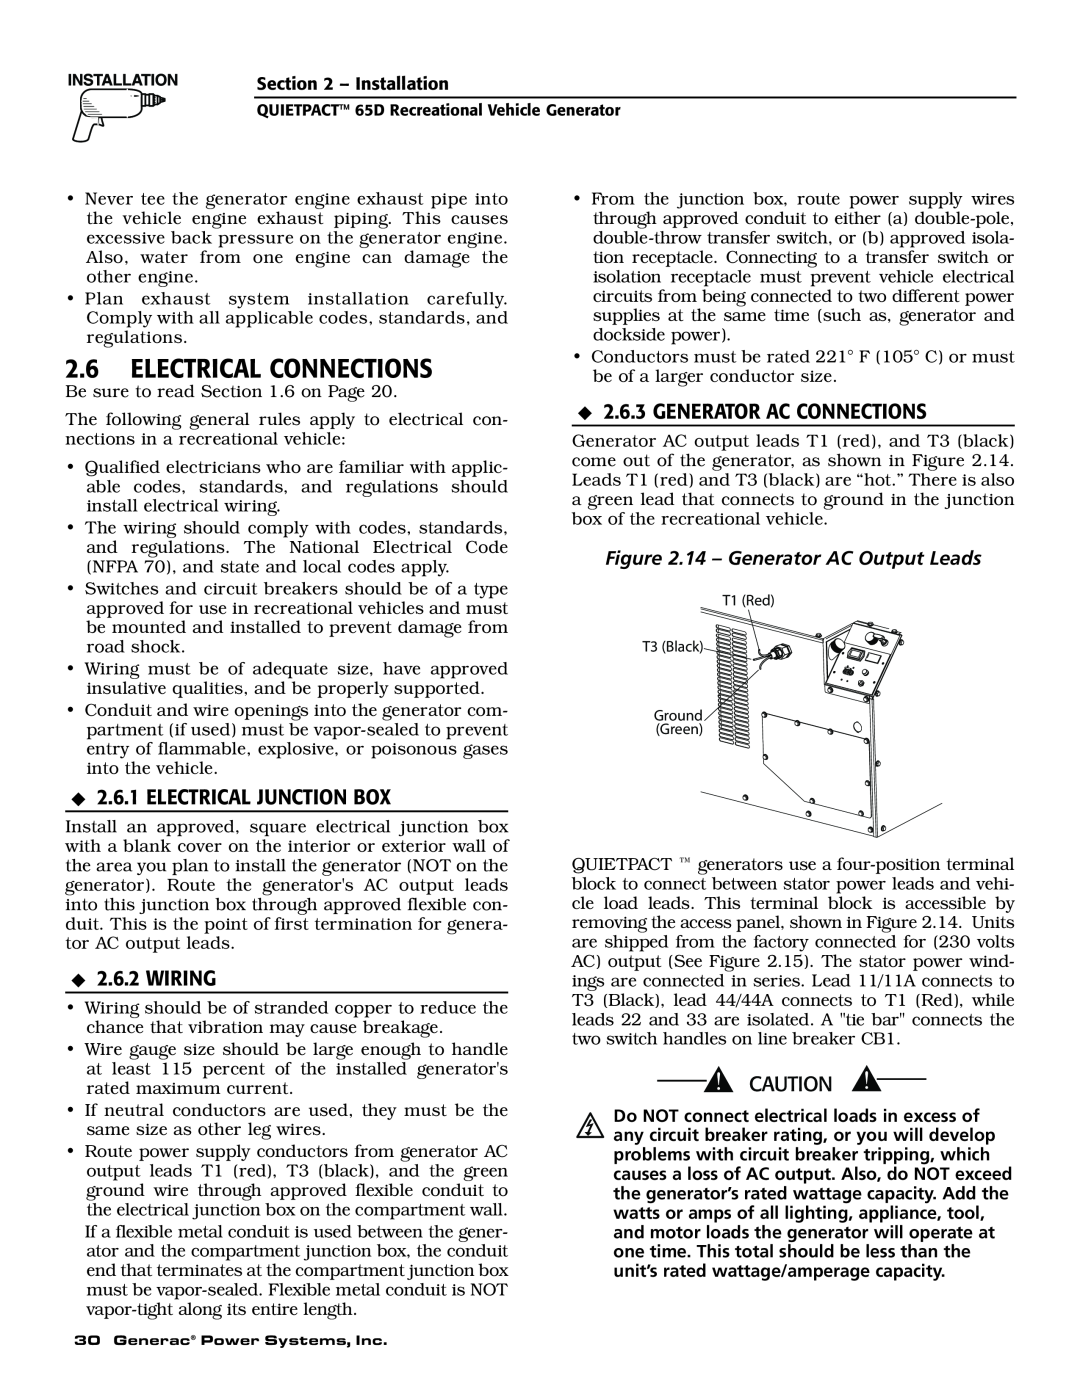 Generac 004614-1 owner manual Electrical Connections, Electrical Junction Box, Wiring, Generator Ac Connections 